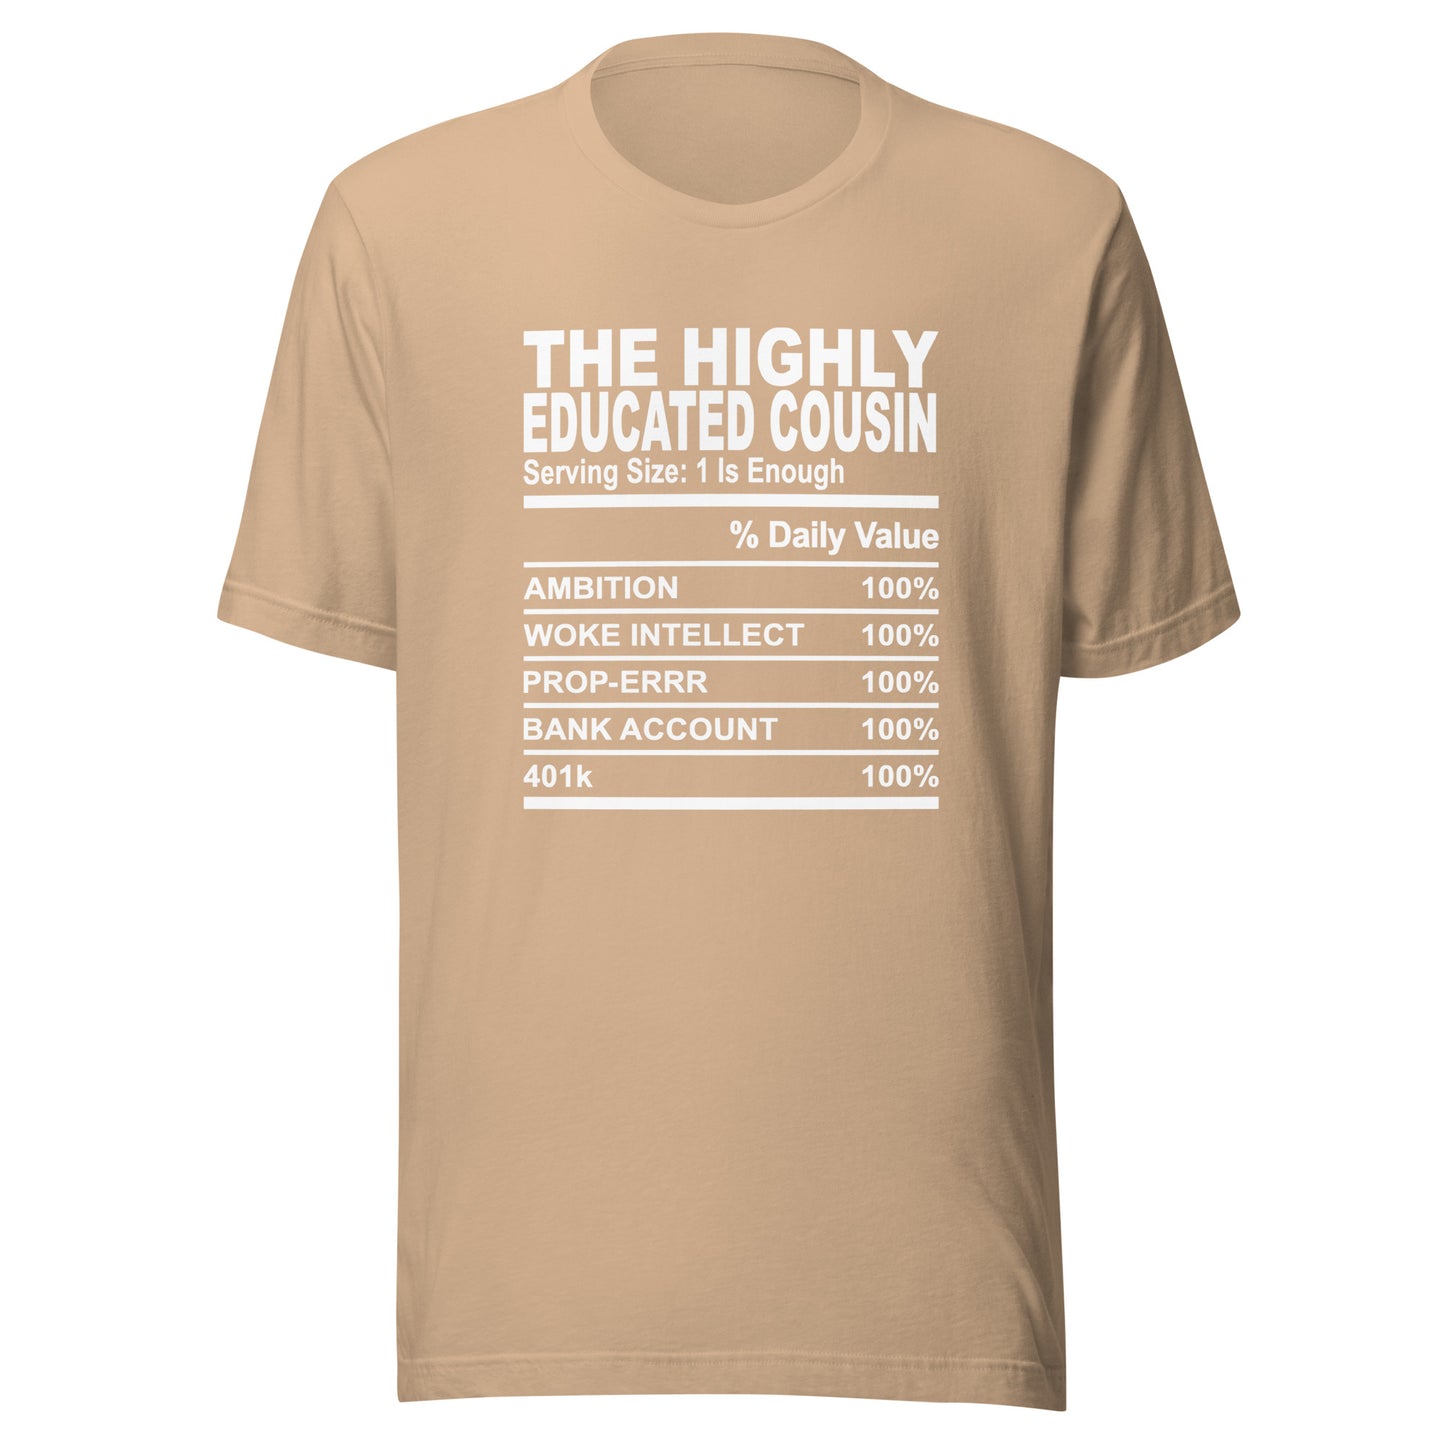 THE HIGHLY EDUCATED COUSIN - 4XL - Unisex T-Shirt (white print)